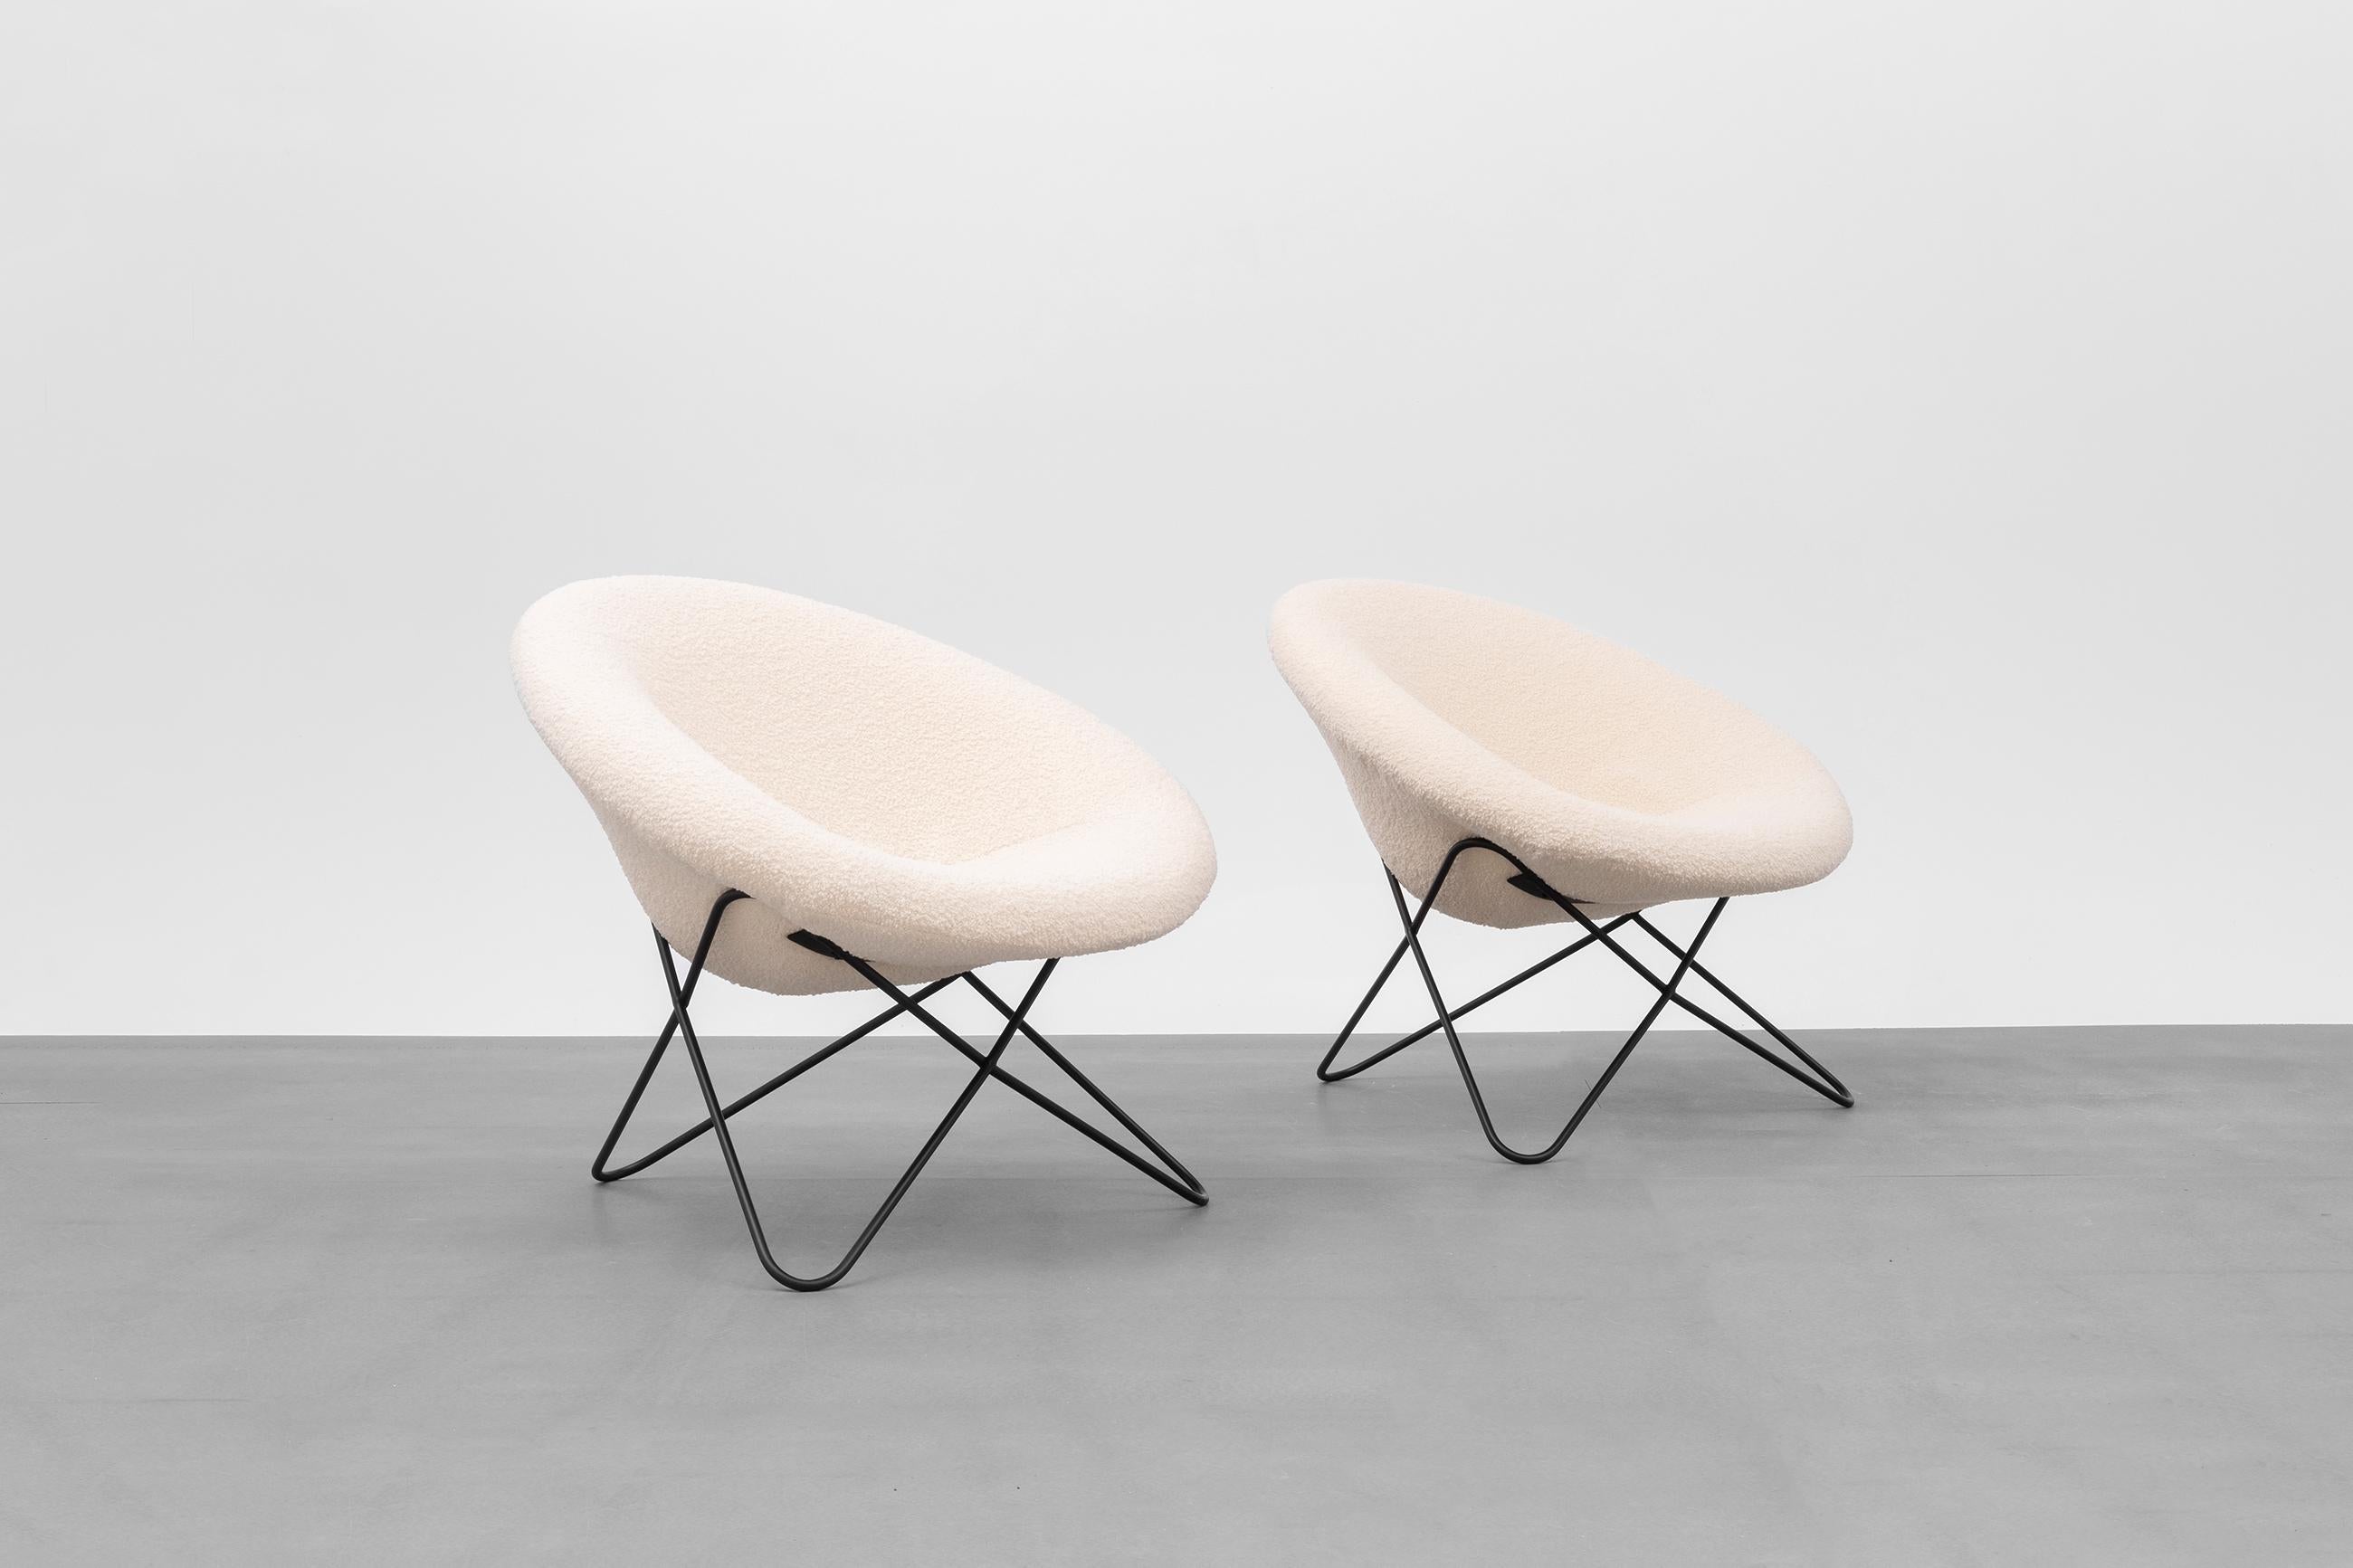 Metal Pair of Hairpin Chairs, France, 1950s